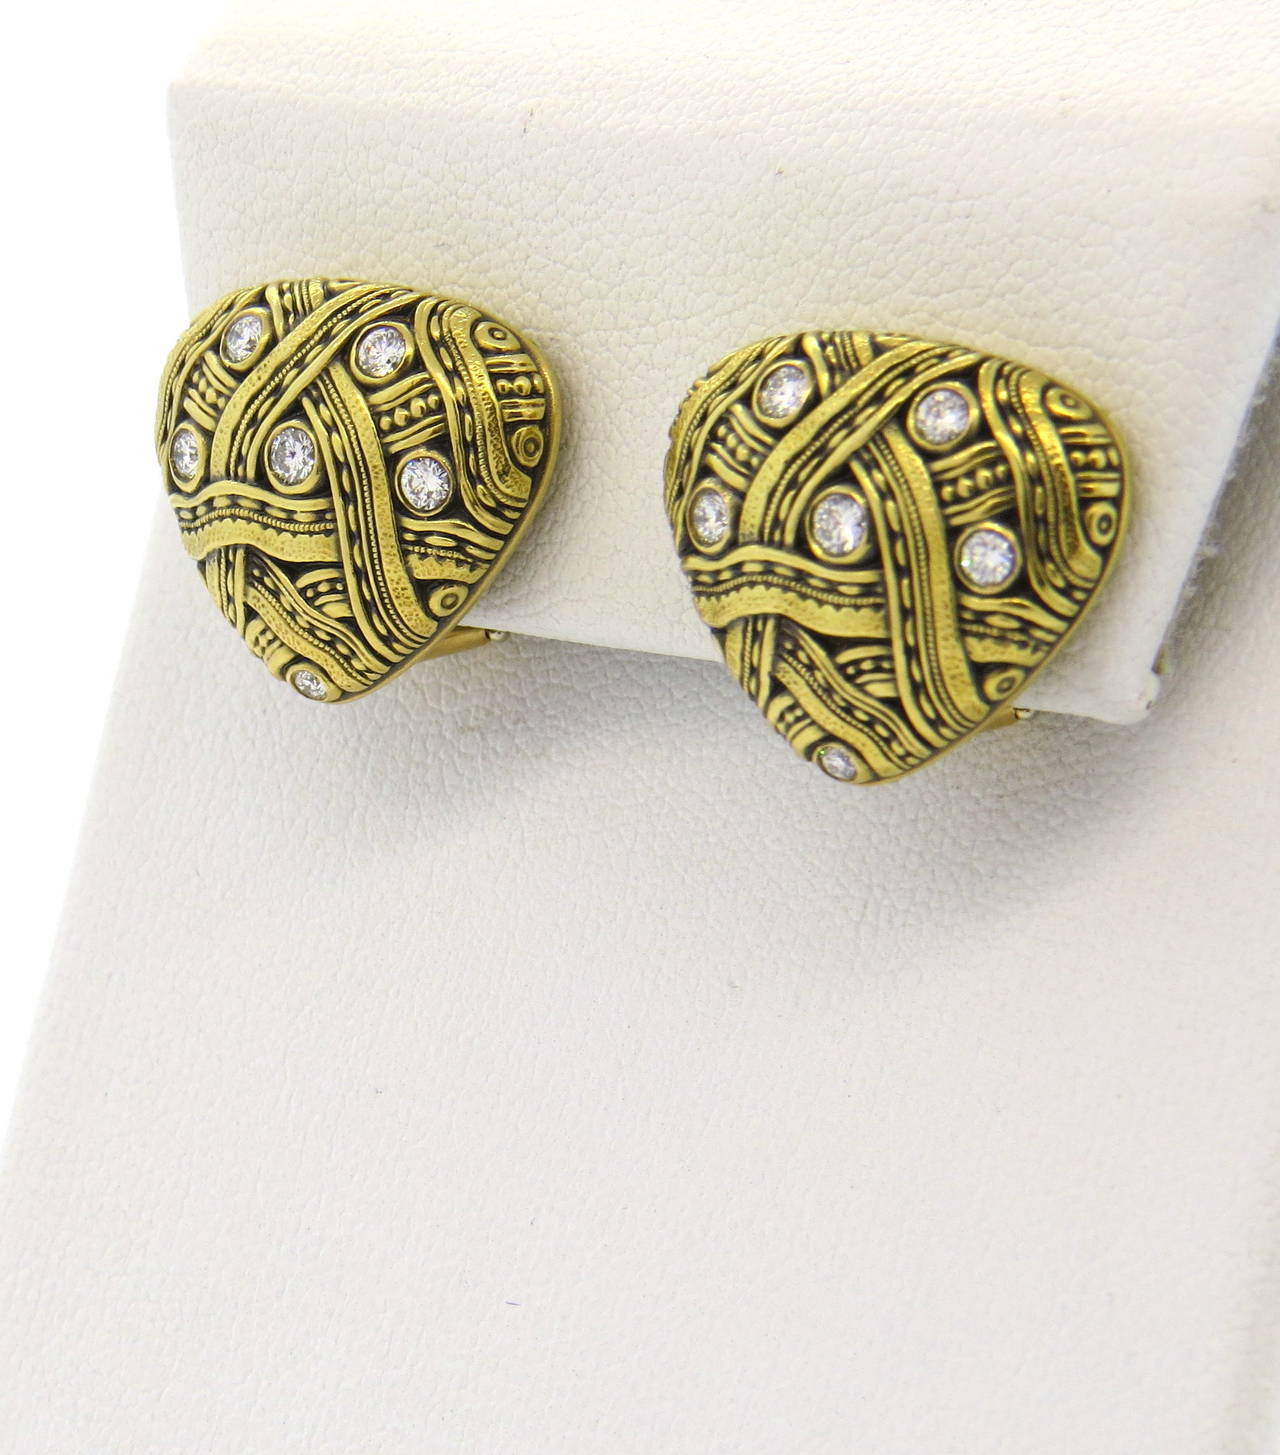 A pair of 18k yellow gold earrings set with approximately 0.30ctw of G/VS diamonds.  Crafted by Alex Sepkus, the earrings measure 19mm x 16.5mm and weigh 13.4 grams.  The earrings have clip backs.